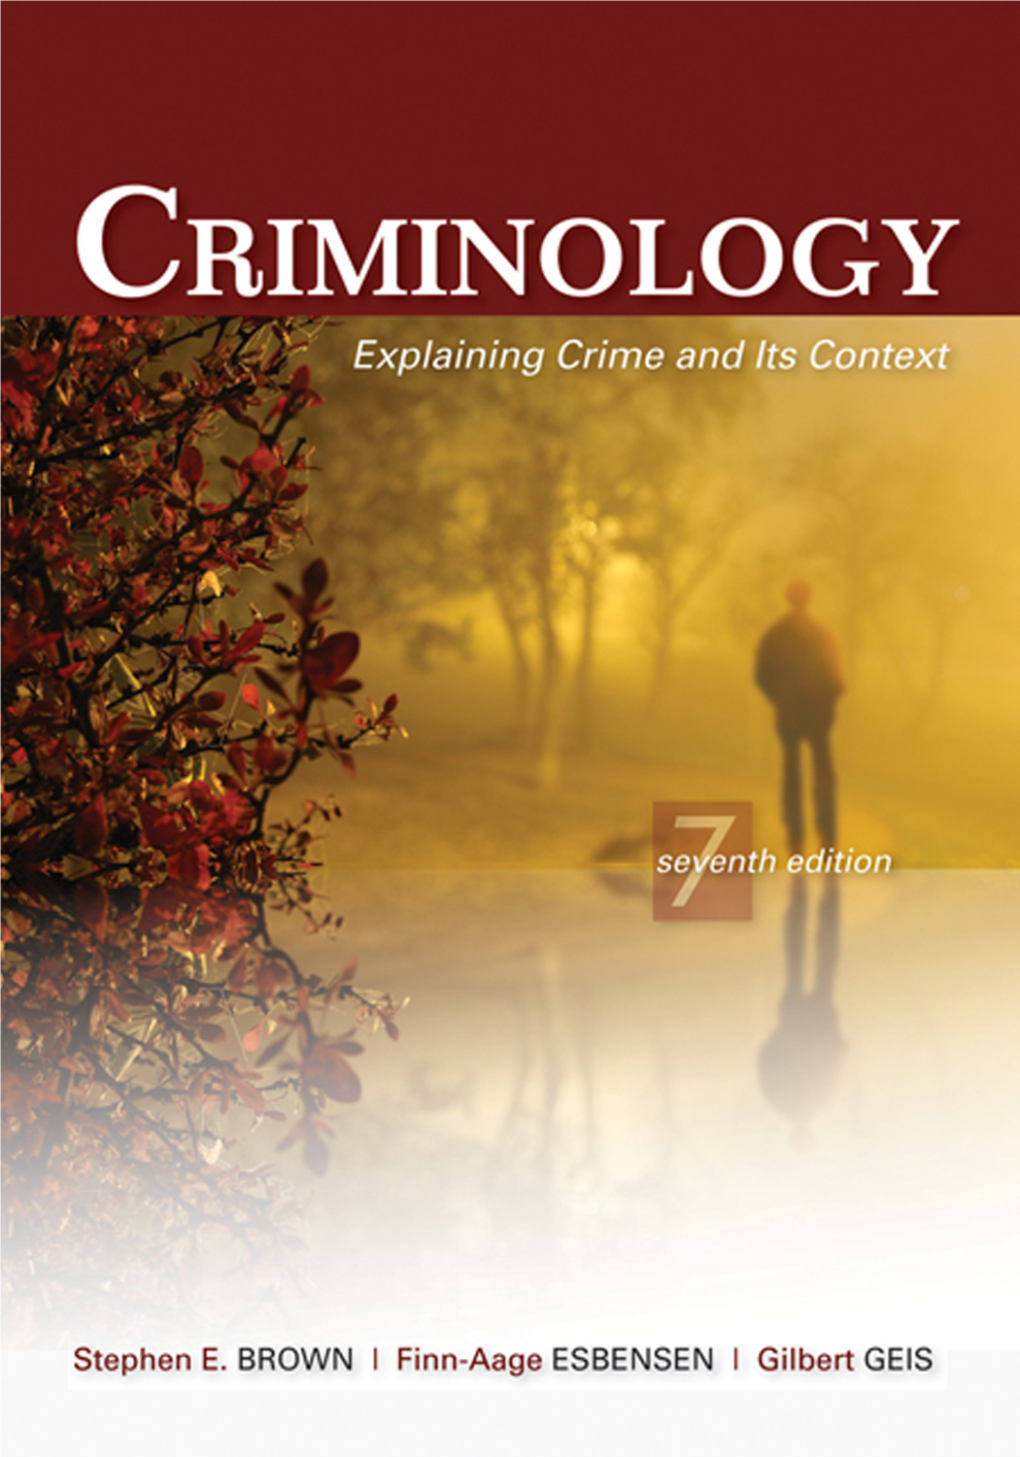 CRIMINOLOGY Explaining Crime and Its Context